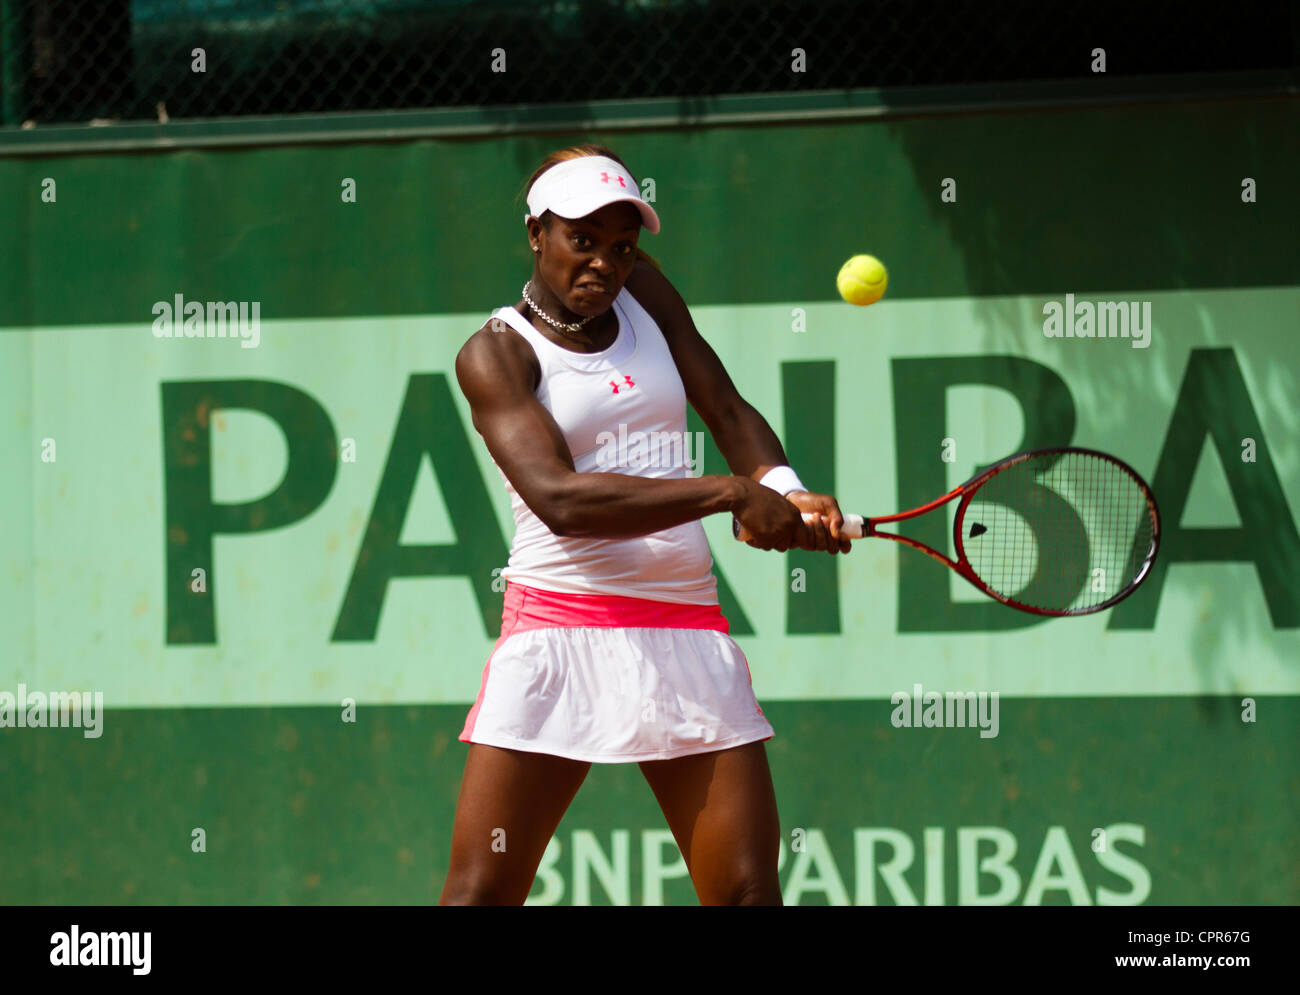 30.05.2012 Paris, France. Sloane Stephens in action against Bethanie Mattek-Sands on day 4 of the French Open Tennis from Roland Garros. Stock Photo